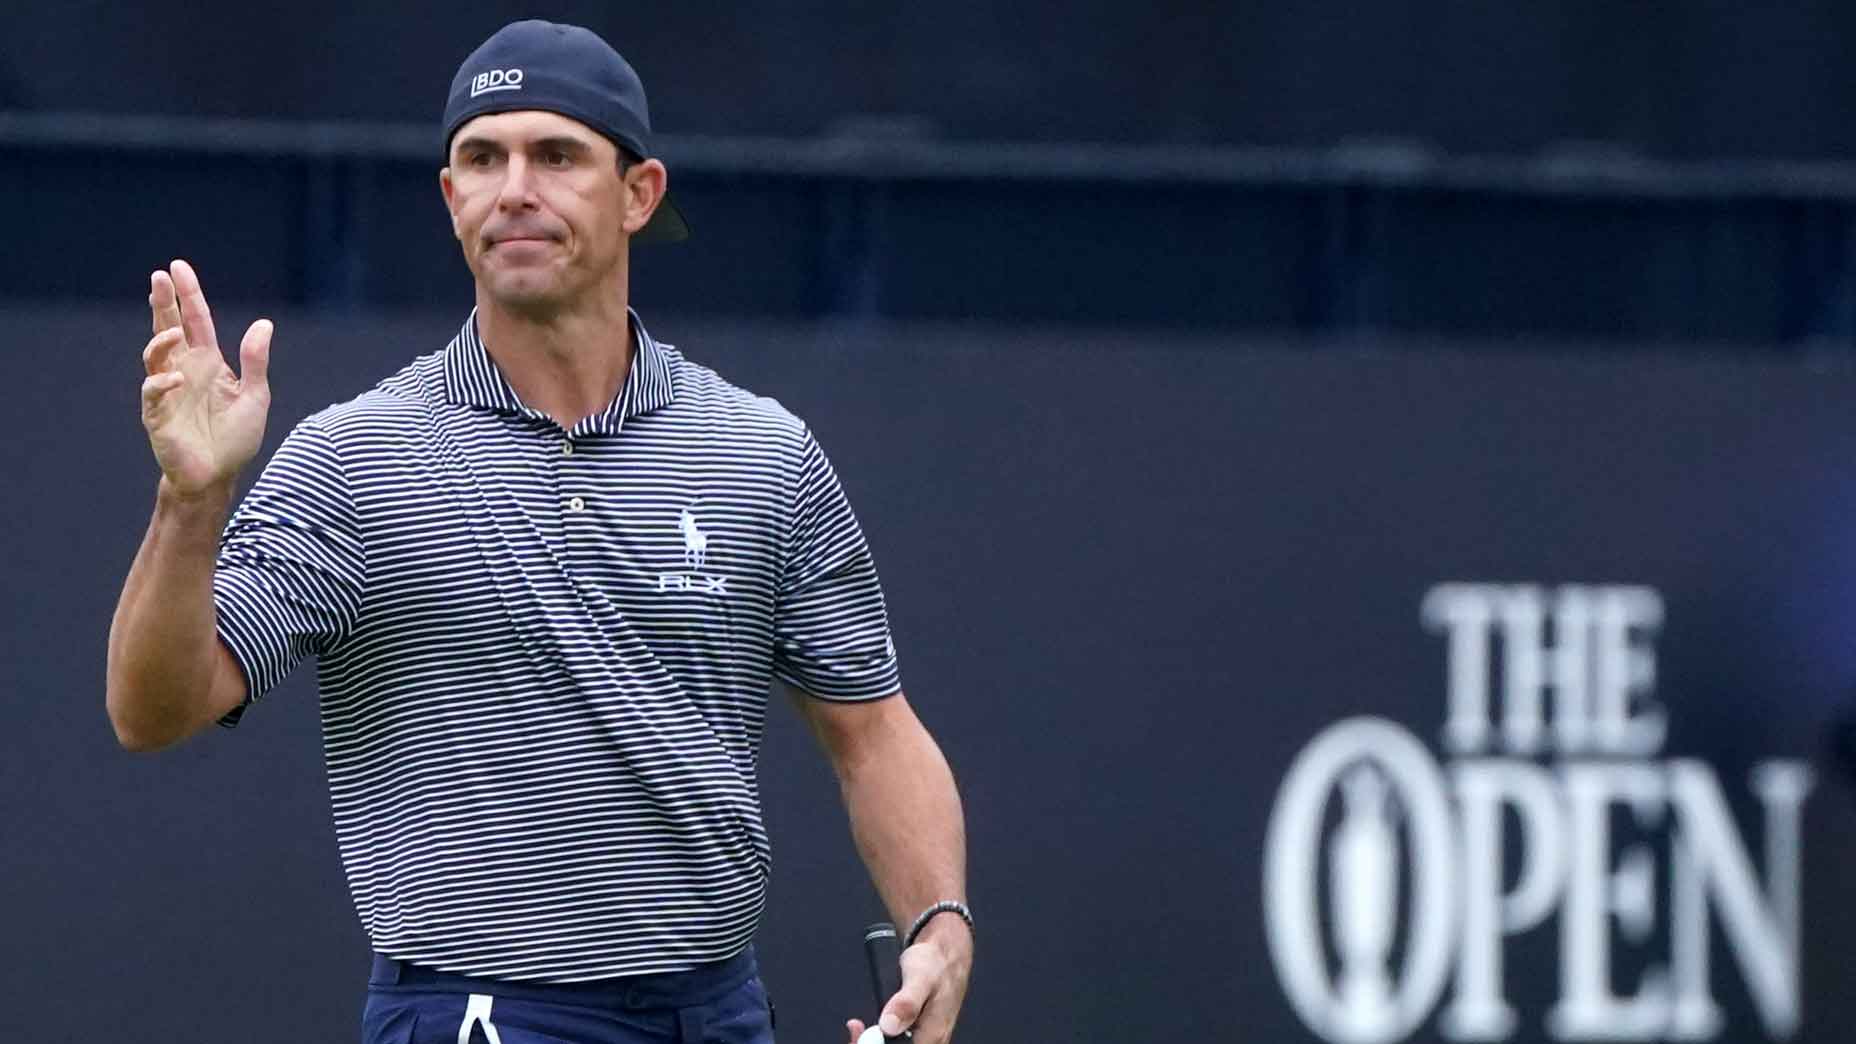 Billy Horschel leading Open with hat maneuver he was 'blasted' for